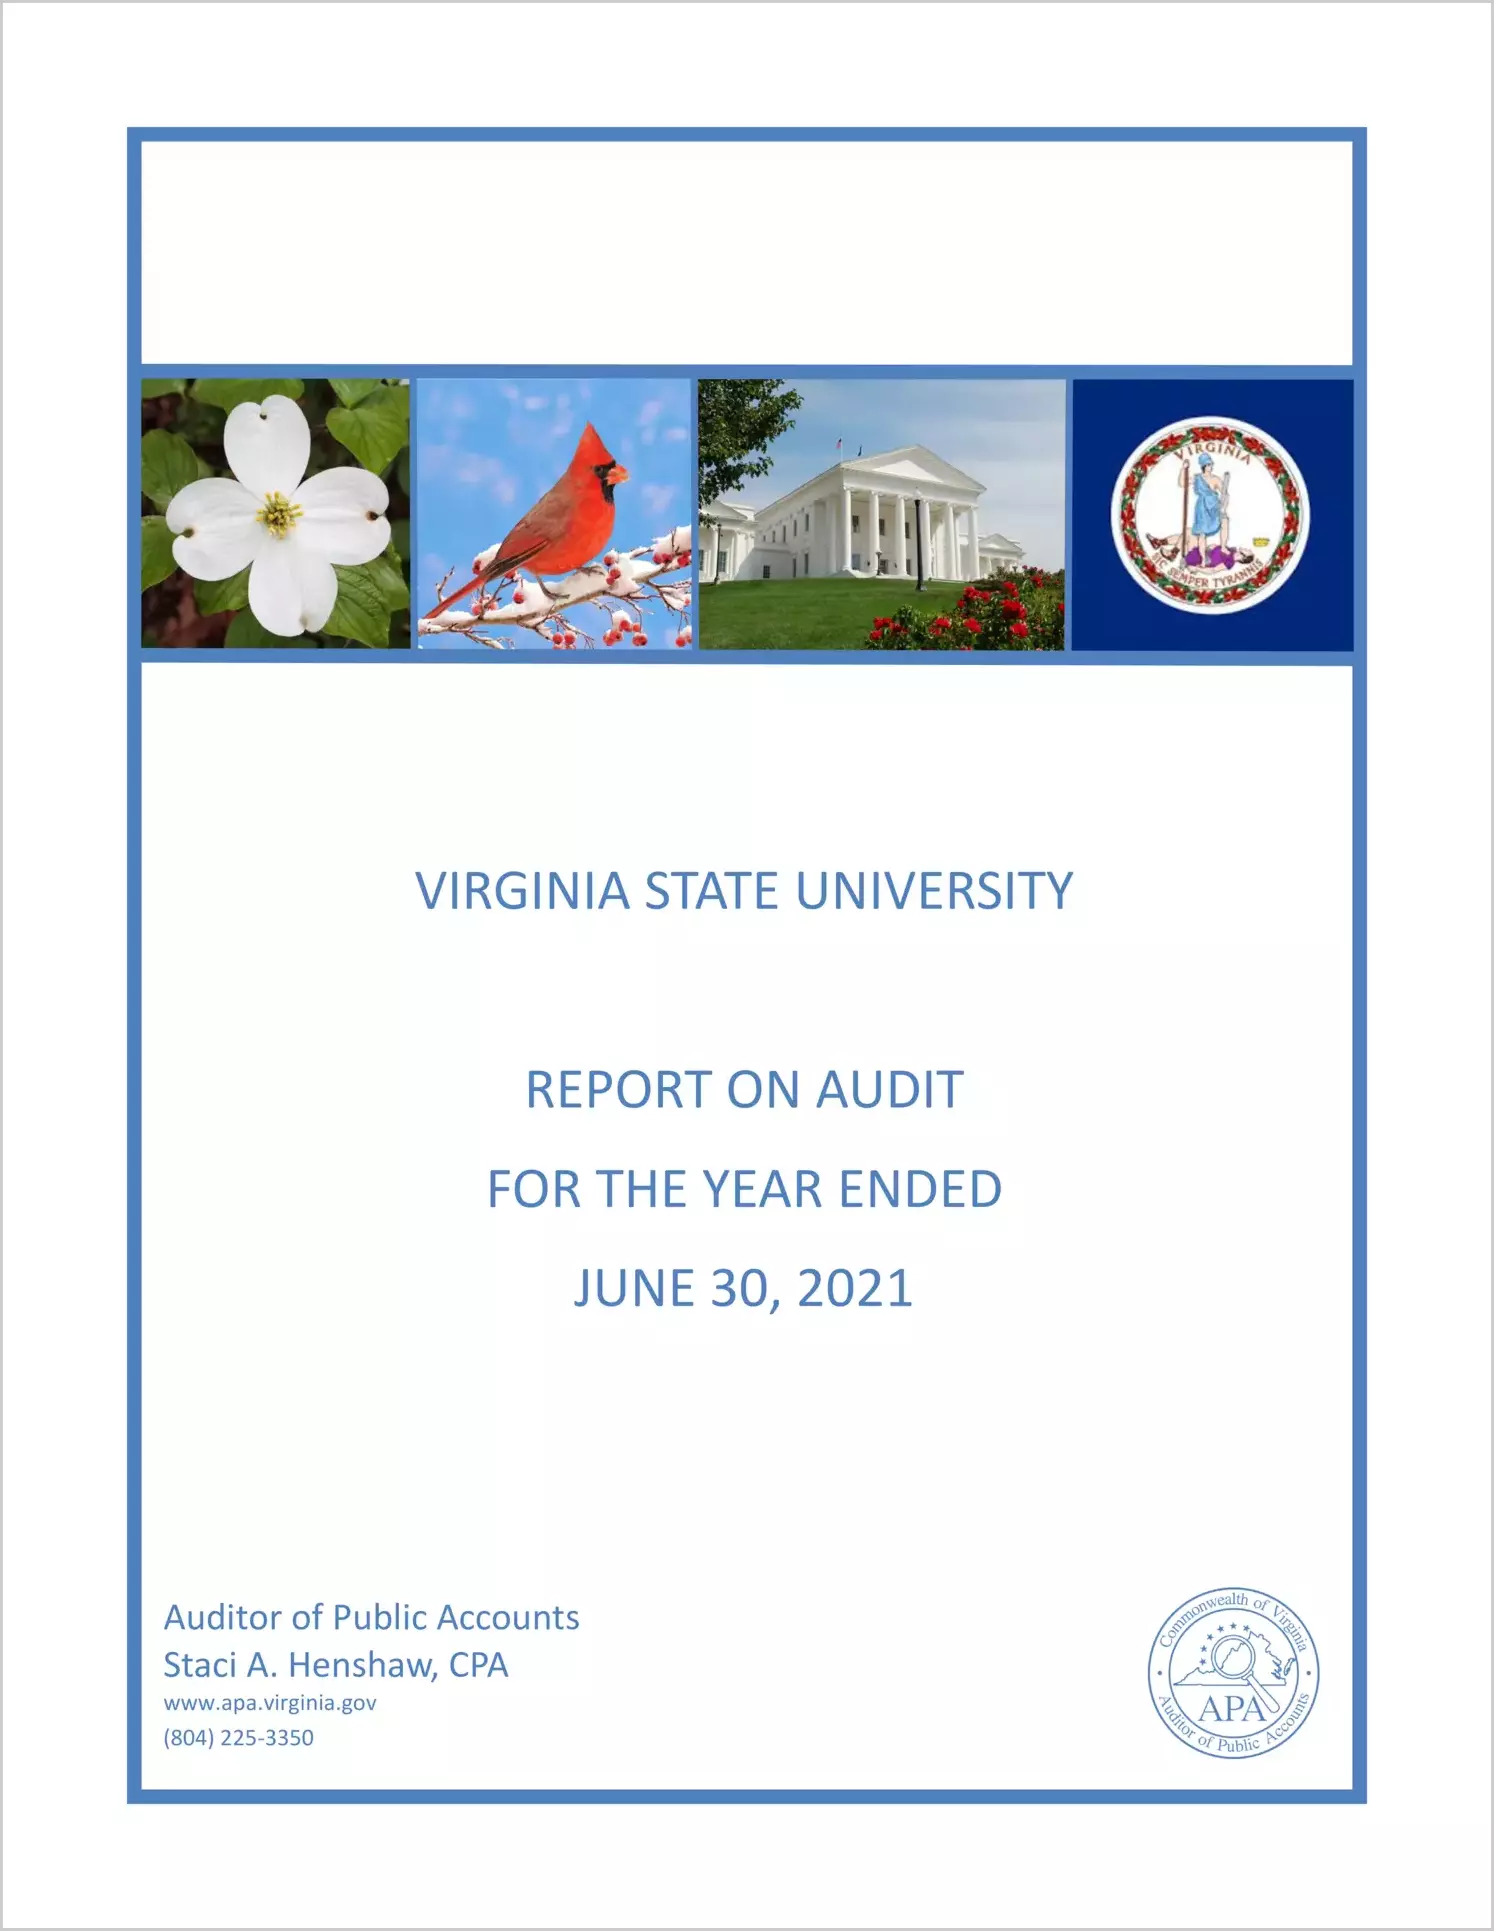 Virginia State University for the year ended June 30, 2021